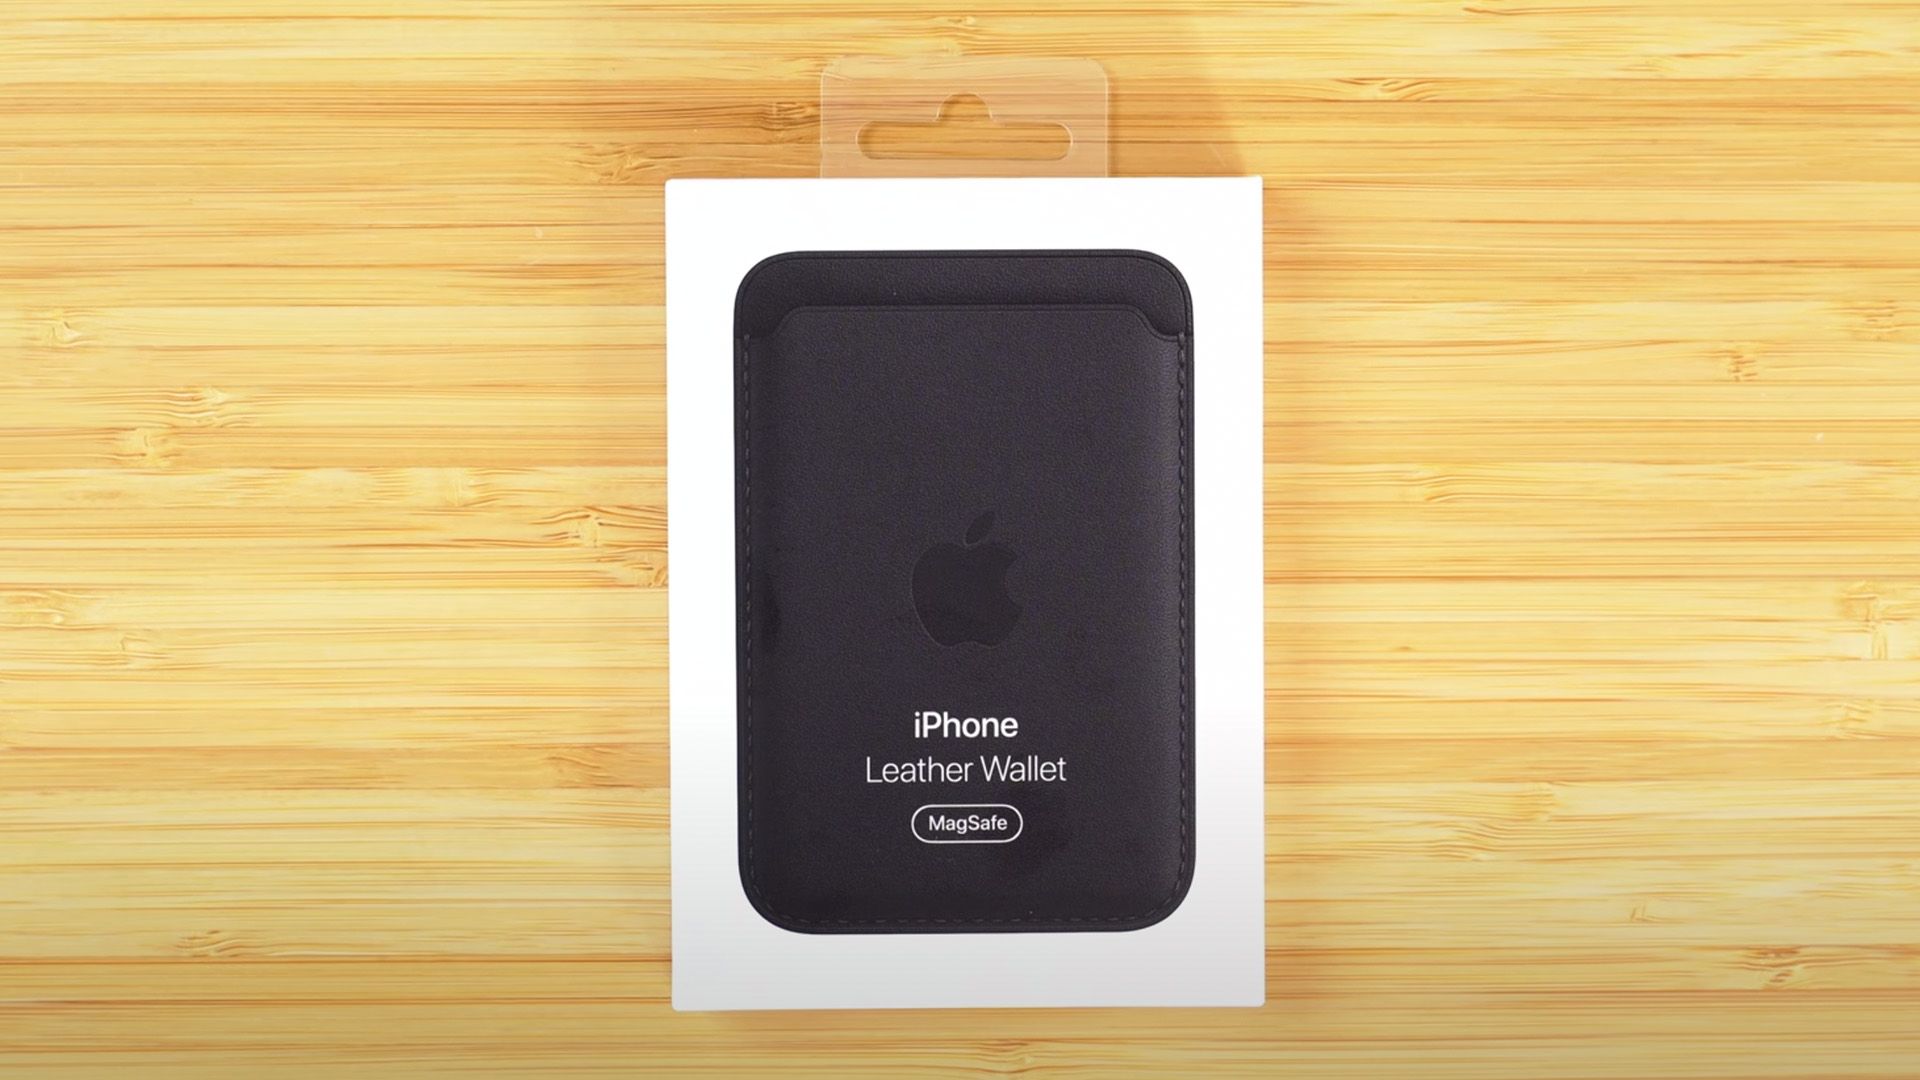 Картхолдер для iphone. Картхолдер Apple Leather Wallet. Кошелек Apple MAGSAFE. Apple Wallet MAGSAFE черный. MAGSAFE Wallet iphone 12.